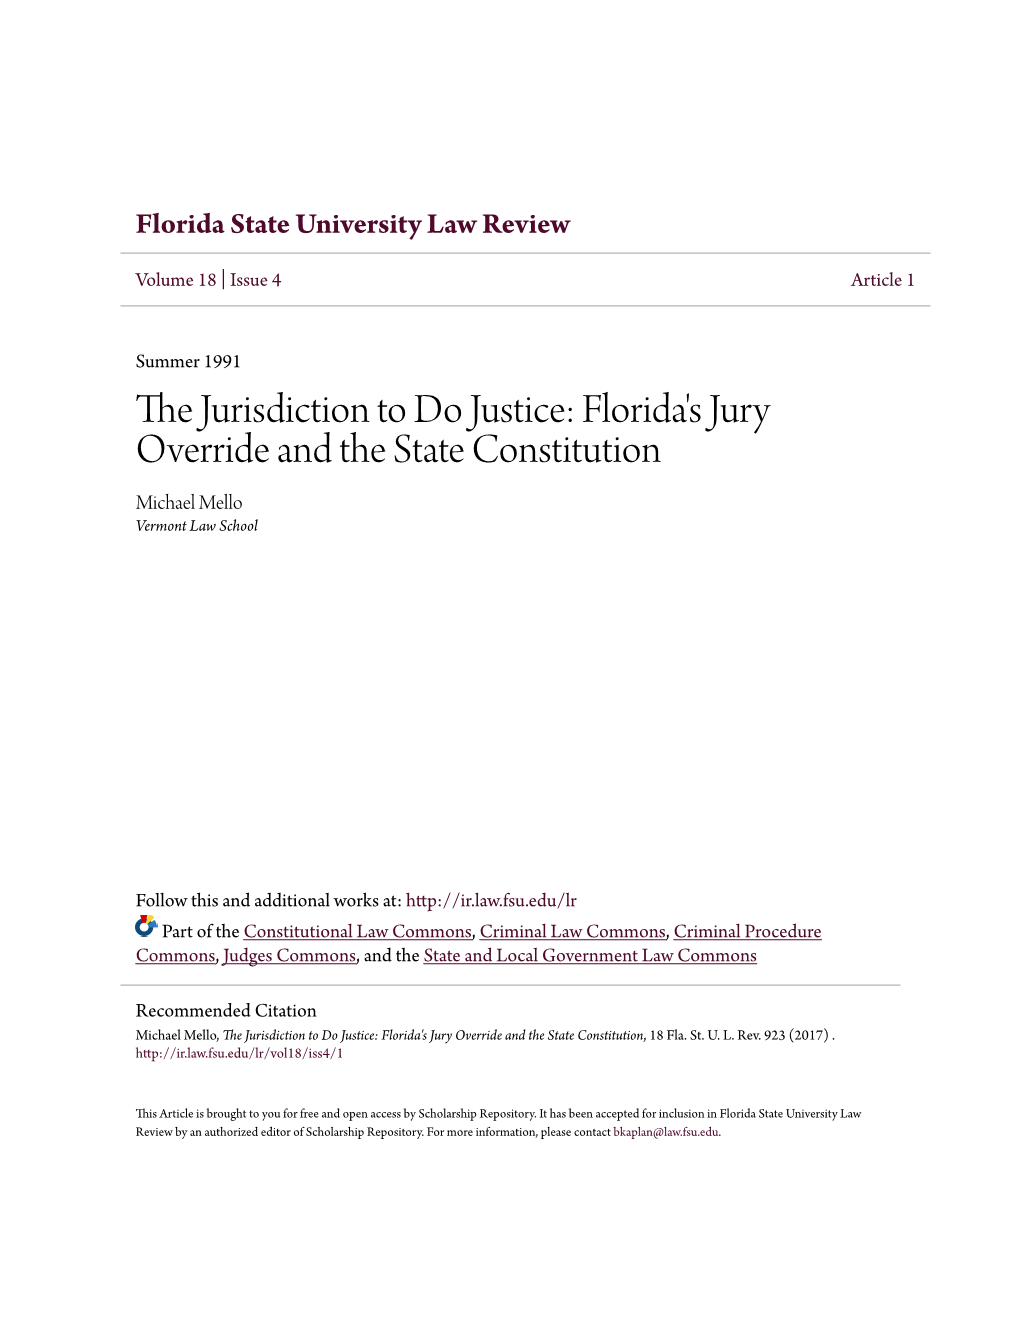 The Jurisdiction to Do Justice: Florida's Jury Override and the State Constitution, 18 Fla